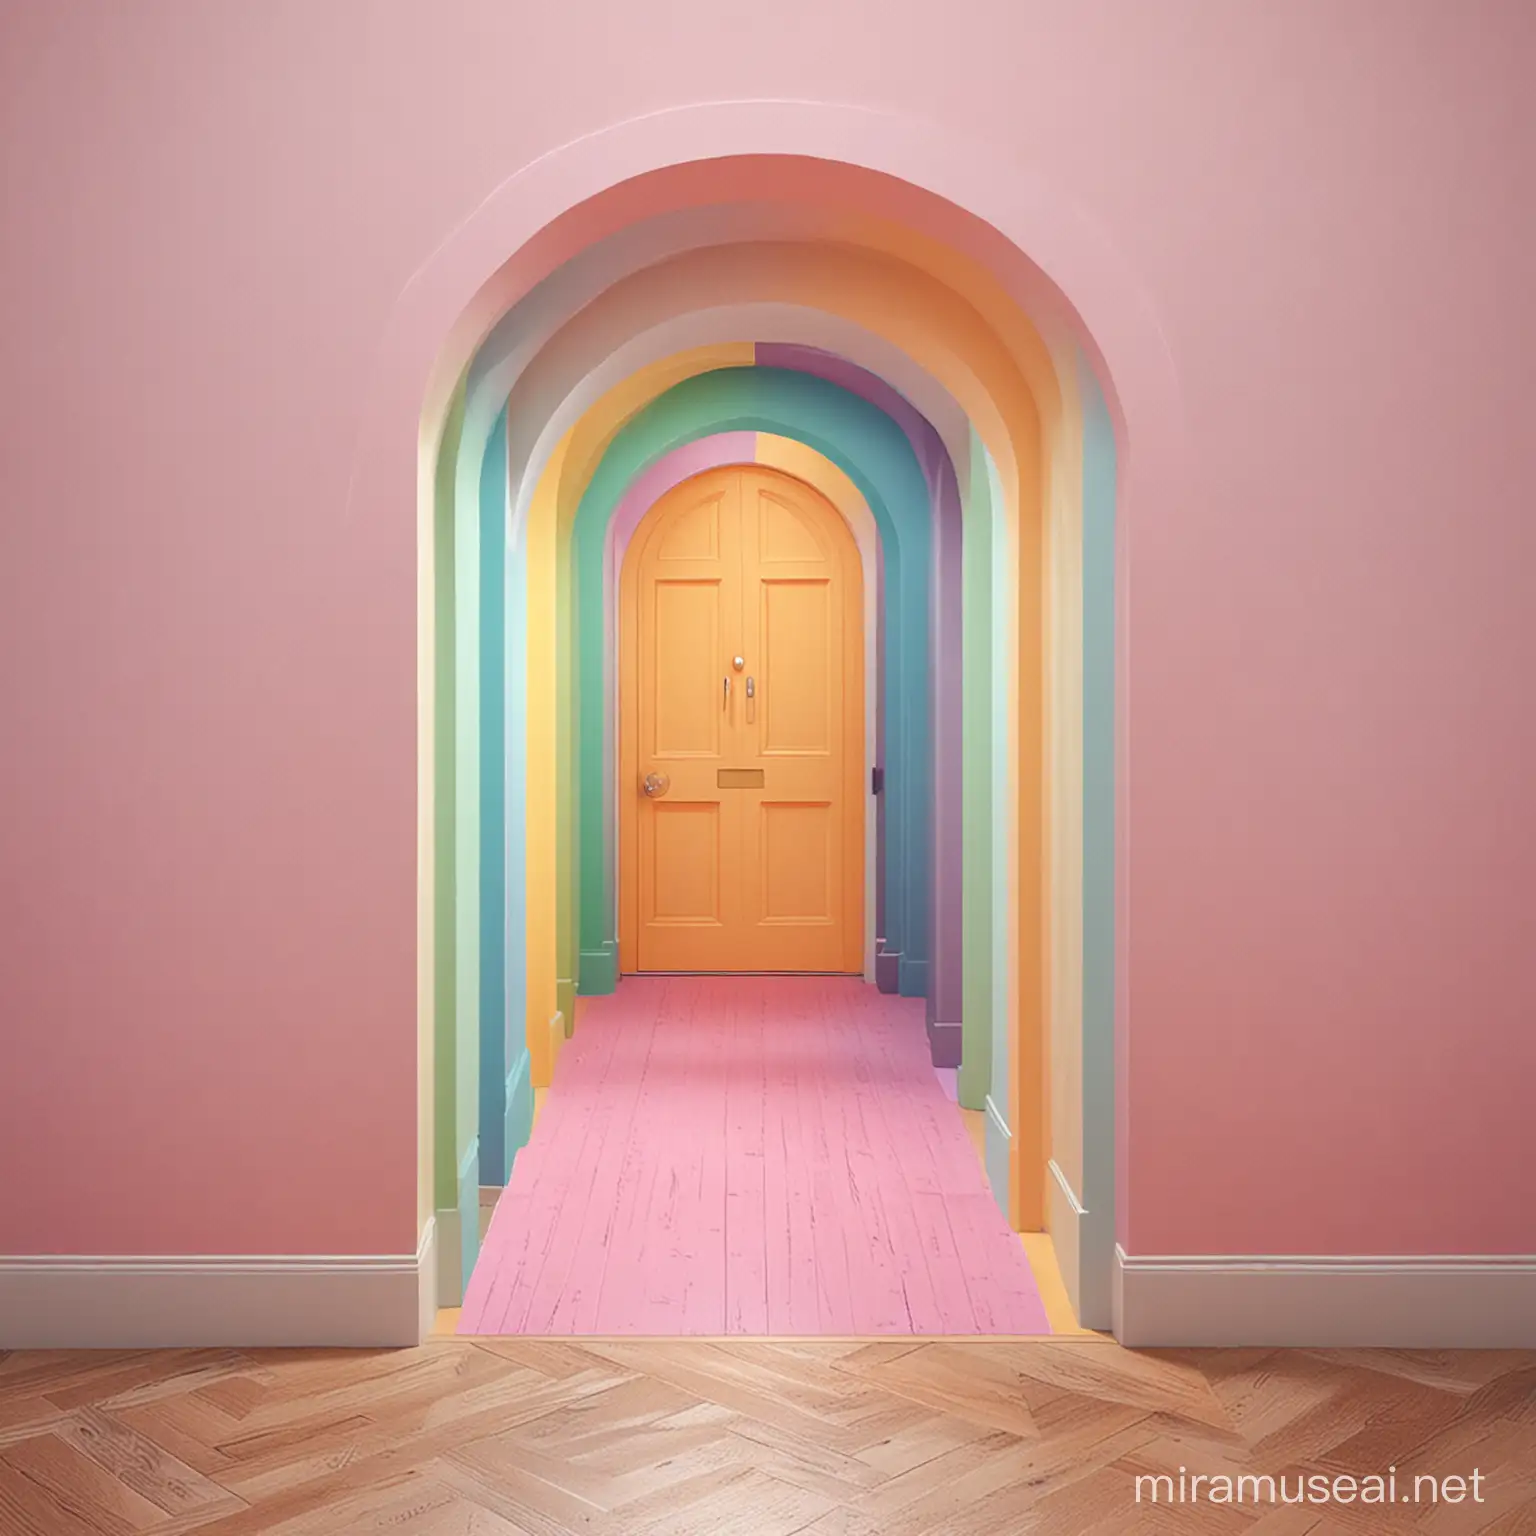 Mesmerizing 3D Optical Illusion Doorway with Stairways and Secret Passages